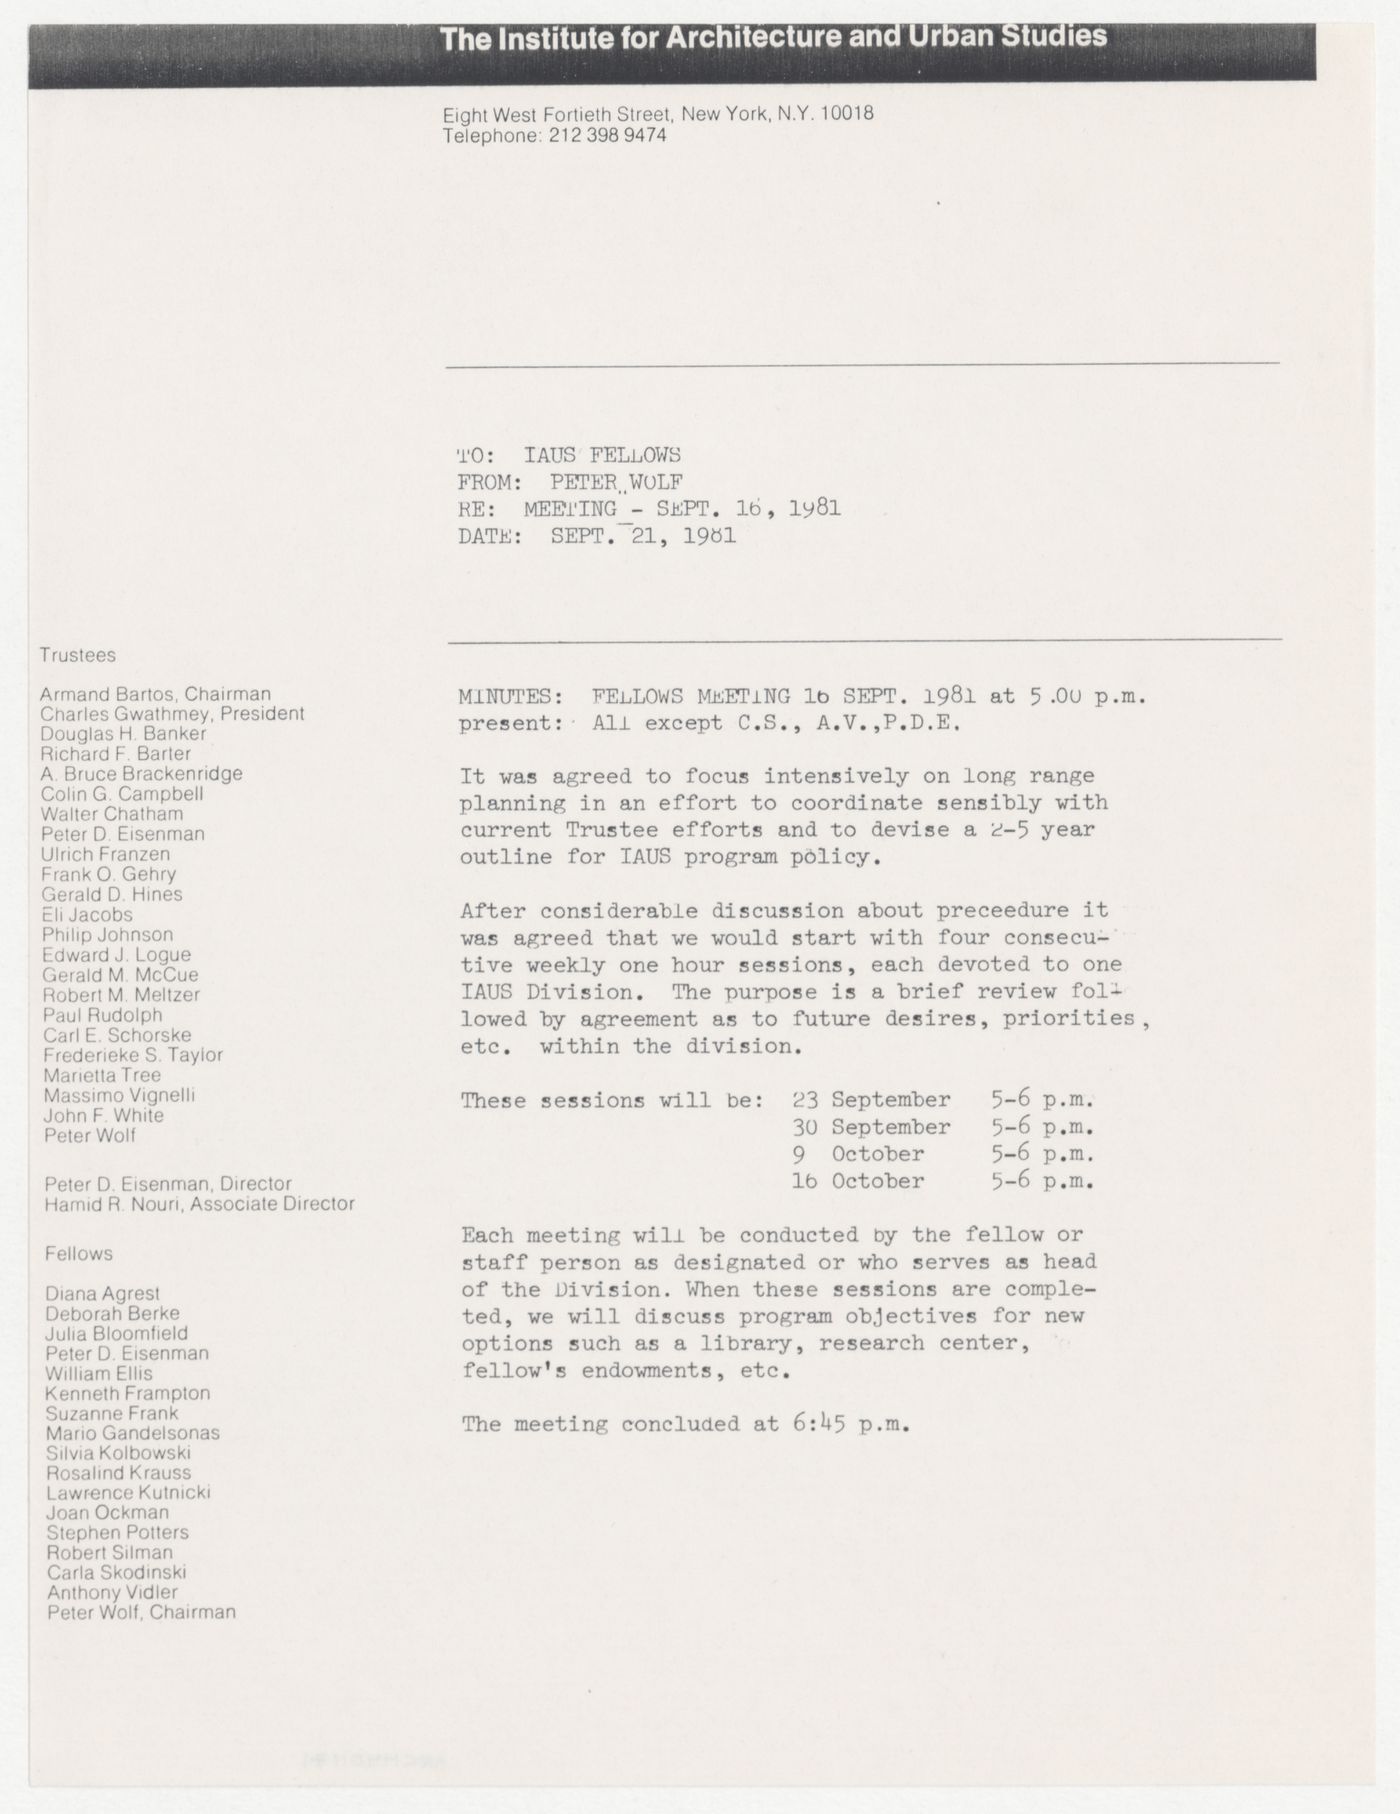 Minutes of meeting of the Fellows on September 16th, 1981